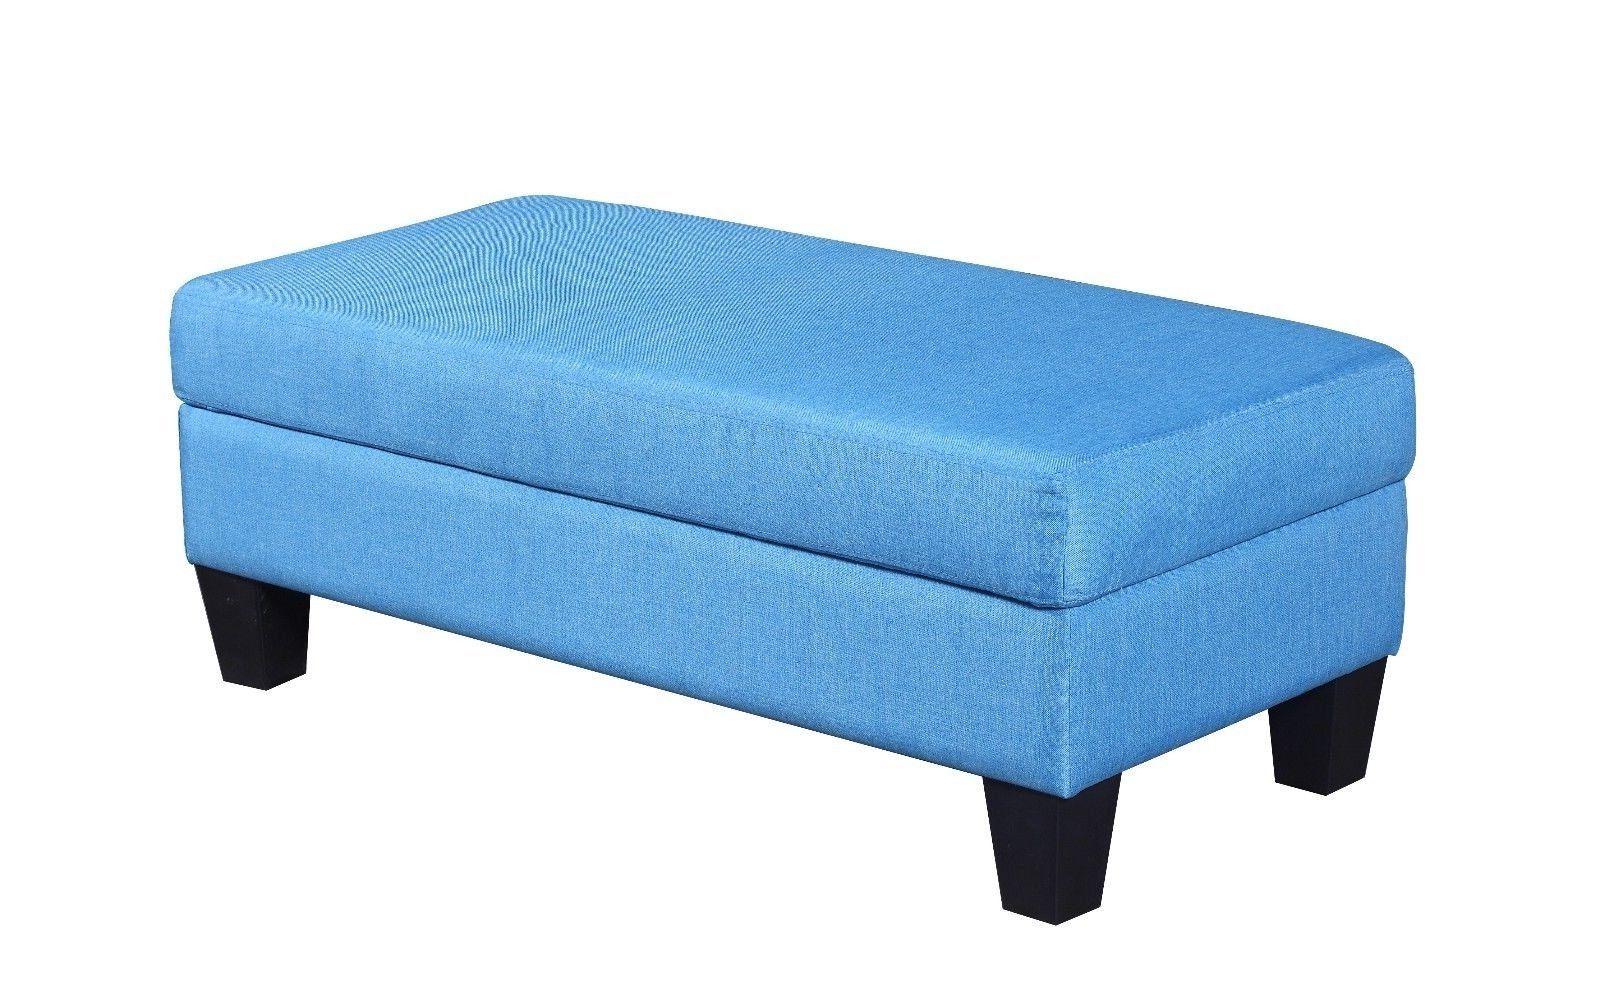 Popular Blue Fabric Storage Ottomans Within Classic Large Fabric Rectangular Storage Ottoman Bench – Sky Blue (View 5 of 10)